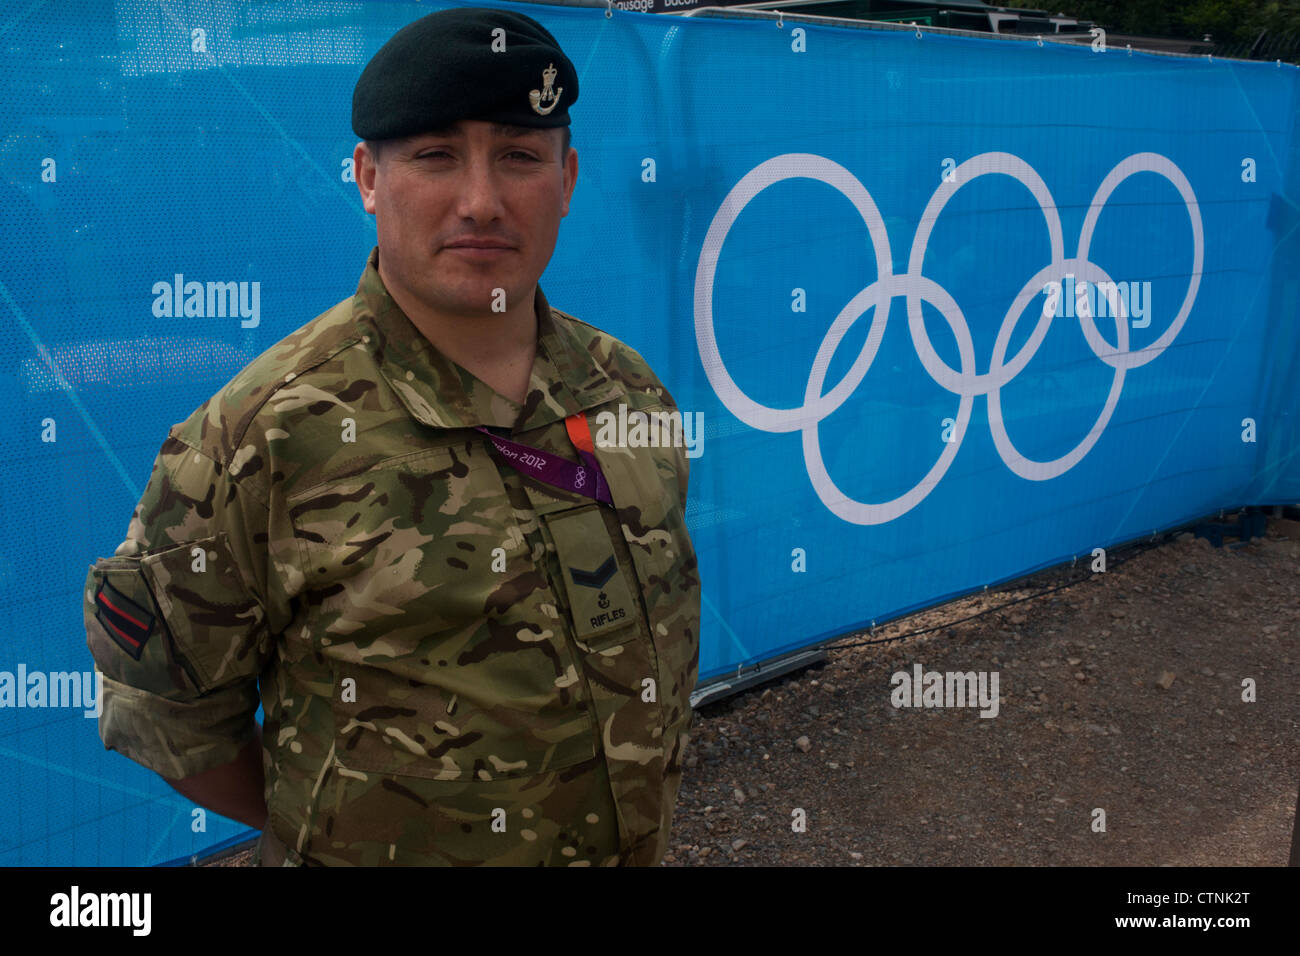 A portrait of a Lance Corporal in the Rifles regiment of the British army next to the Olympic rings logo before the start of the canoe slalom heats at the Lee Valley White Water Centre, north east London, on day 3 of the London 2012 Olympic Games. A further 1,200 military personnel are being deployed to help secure the 2012 Olympics in London following the failure by security contractor G4S to provide enough private guards. The extra personnel have been drafted in amid continuing fears that the private security contractor's handling of the £284m contract remains a risk to the Games. Stock Photo